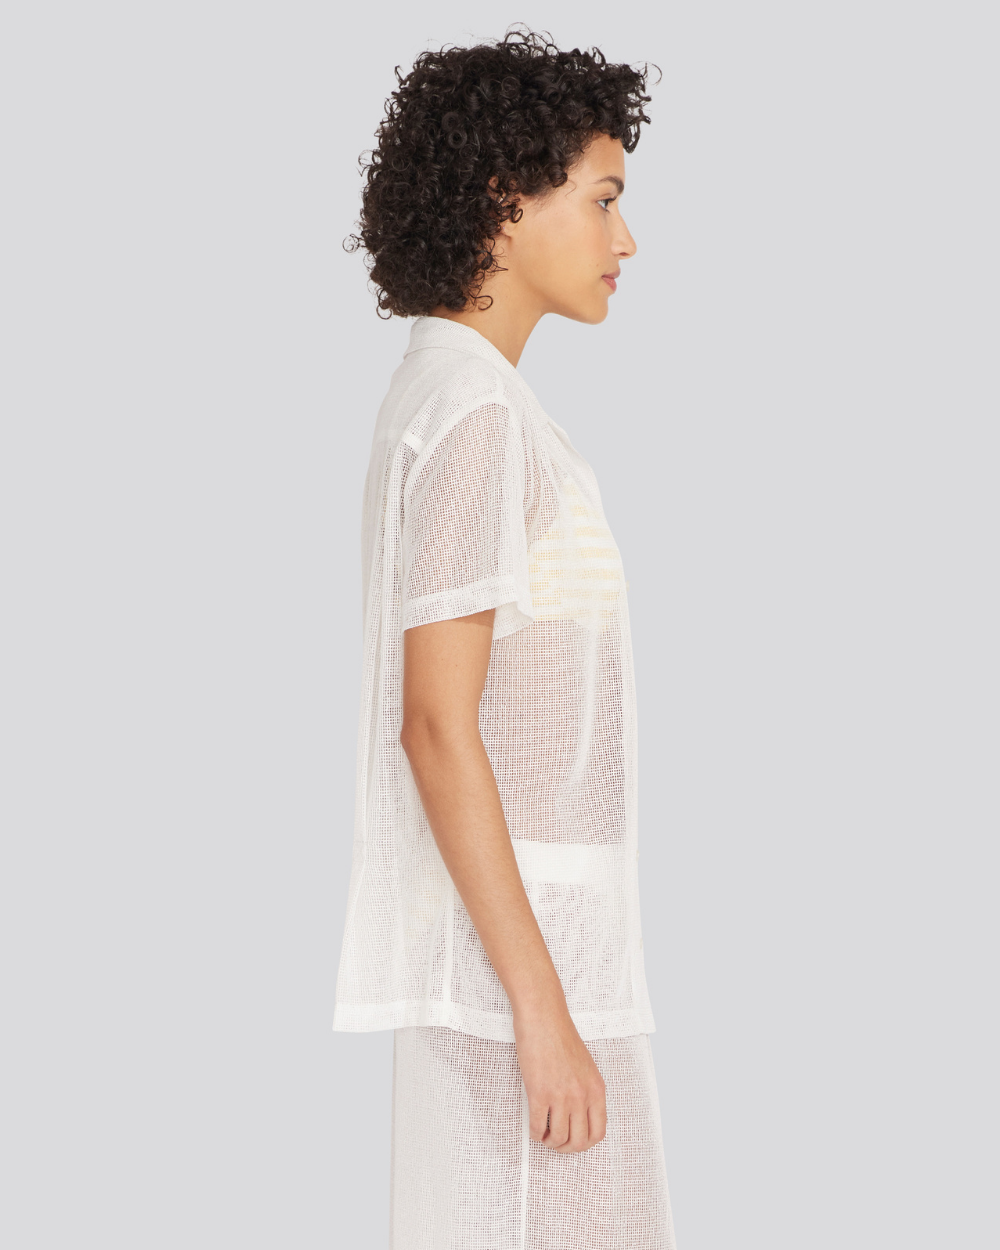 The Dahlia Top - Solid & Striped